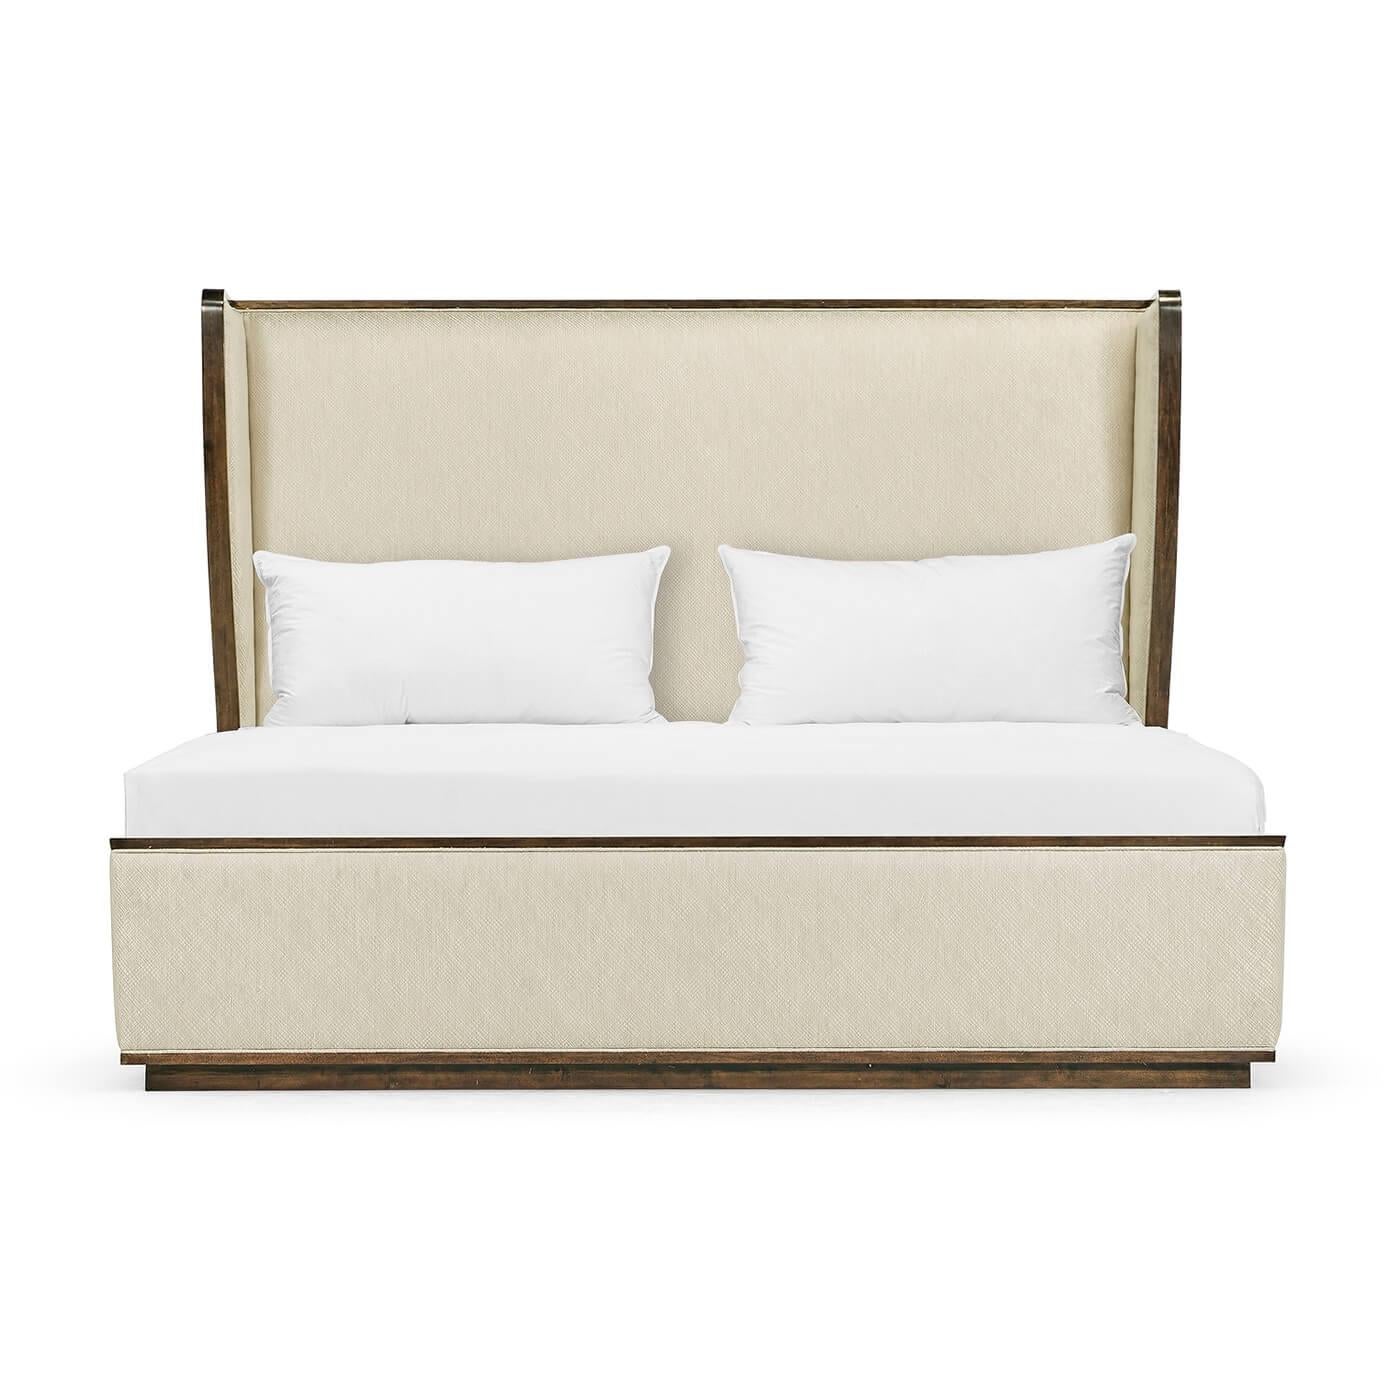 Mid-Century Modern style winged back king size bed, with a hand-rubbed American walnut frame, over upholstered headboard, wings, side rails and footboard.

Dimensions: 85 1/8